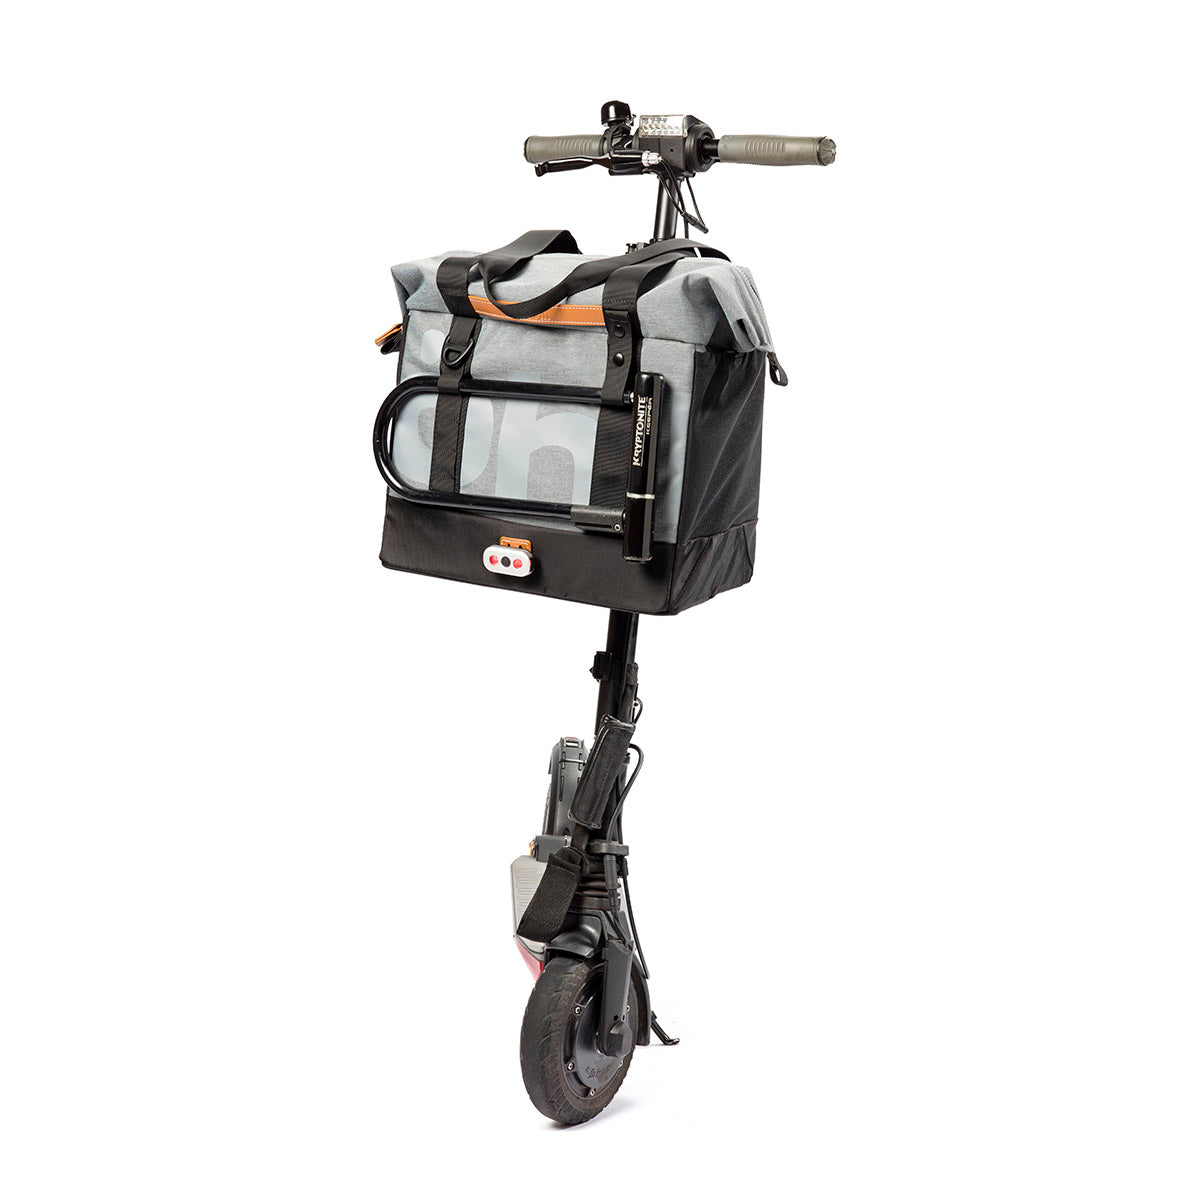 e-scooter with the Öhll-in bag and a u-lock placed using the multifunctional molle